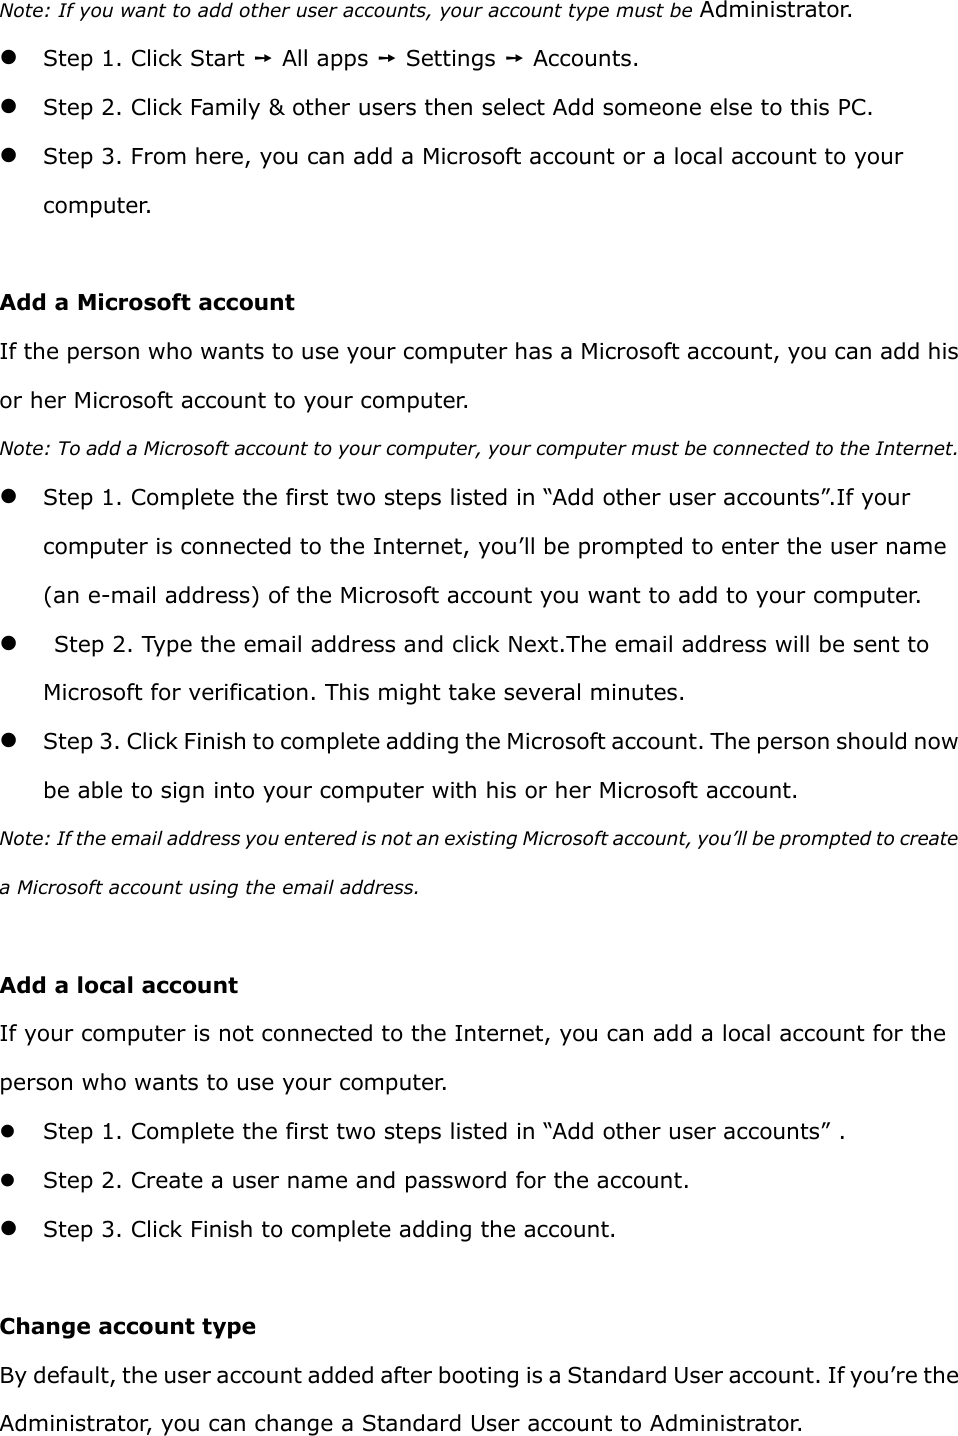 Note: If you want to add other user accounts, your account type must be Administrator.    Step 1. Click Start ➙ All apps ➙ Settings ➙ Accounts.    Step 2. Click Family &amp; other users then select Add someone else to this PC.    Step 3. From here, you can add a Microsoft account or a local account to your computer.    Add a Microsoft account   If the person who wants to use your computer has a Microsoft account, you can add his or her Microsoft account to your computer. Note: To add a Microsoft account to your computer, your computer must be connected to the Internet.    Step 1. Complete the first two steps listed in “Add other user accounts”.If your computer is connected to the Internet, you’ll be prompted to enter the user name (an e-mail address) of the Microsoft account you want to add to your computer.    Step 2. Type the email address and click Next.The email address will be sent to Microsoft for verification. This might take several minutes.    Step 3. Click Finish to complete adding the Microsoft account. The person should now be able to sign into your computer with his or her Microsoft account.   Note: If the email address you entered is not an existing Microsoft account, you’ll be prompted to create a Microsoft account using the email address.    Add a local account   If your computer is not connected to the Internet, you can add a local account for the person who wants to use your computer.    Step 1. Complete the first two steps listed in “Add other user accounts” .  Step 2. Create a user name and password for the account.    Step 3. Click Finish to complete adding the account.  Change account type   By default, the user account added after booting is a Standard User account. If you’re the Administrator, you can change a Standard User account to Administrator.   